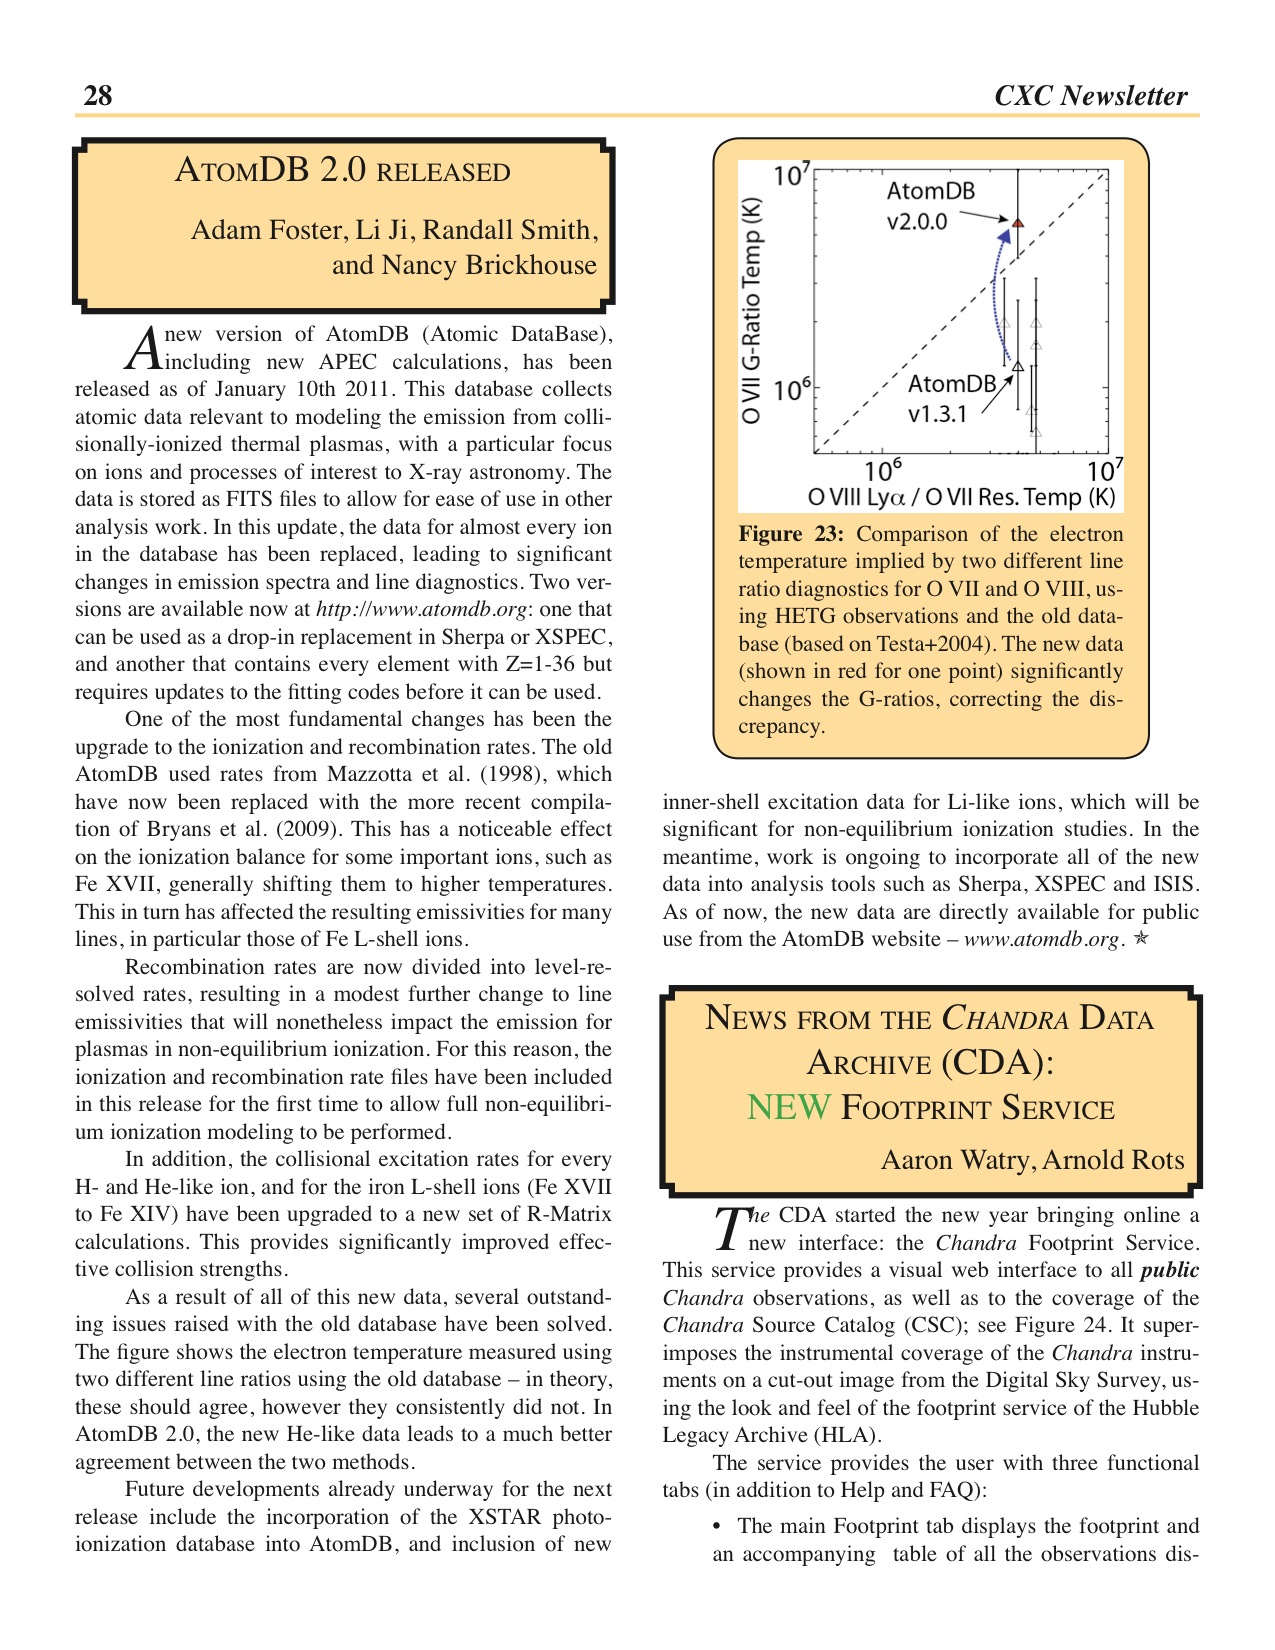 Page 28 of the Chandra Newsletter, issue 18.